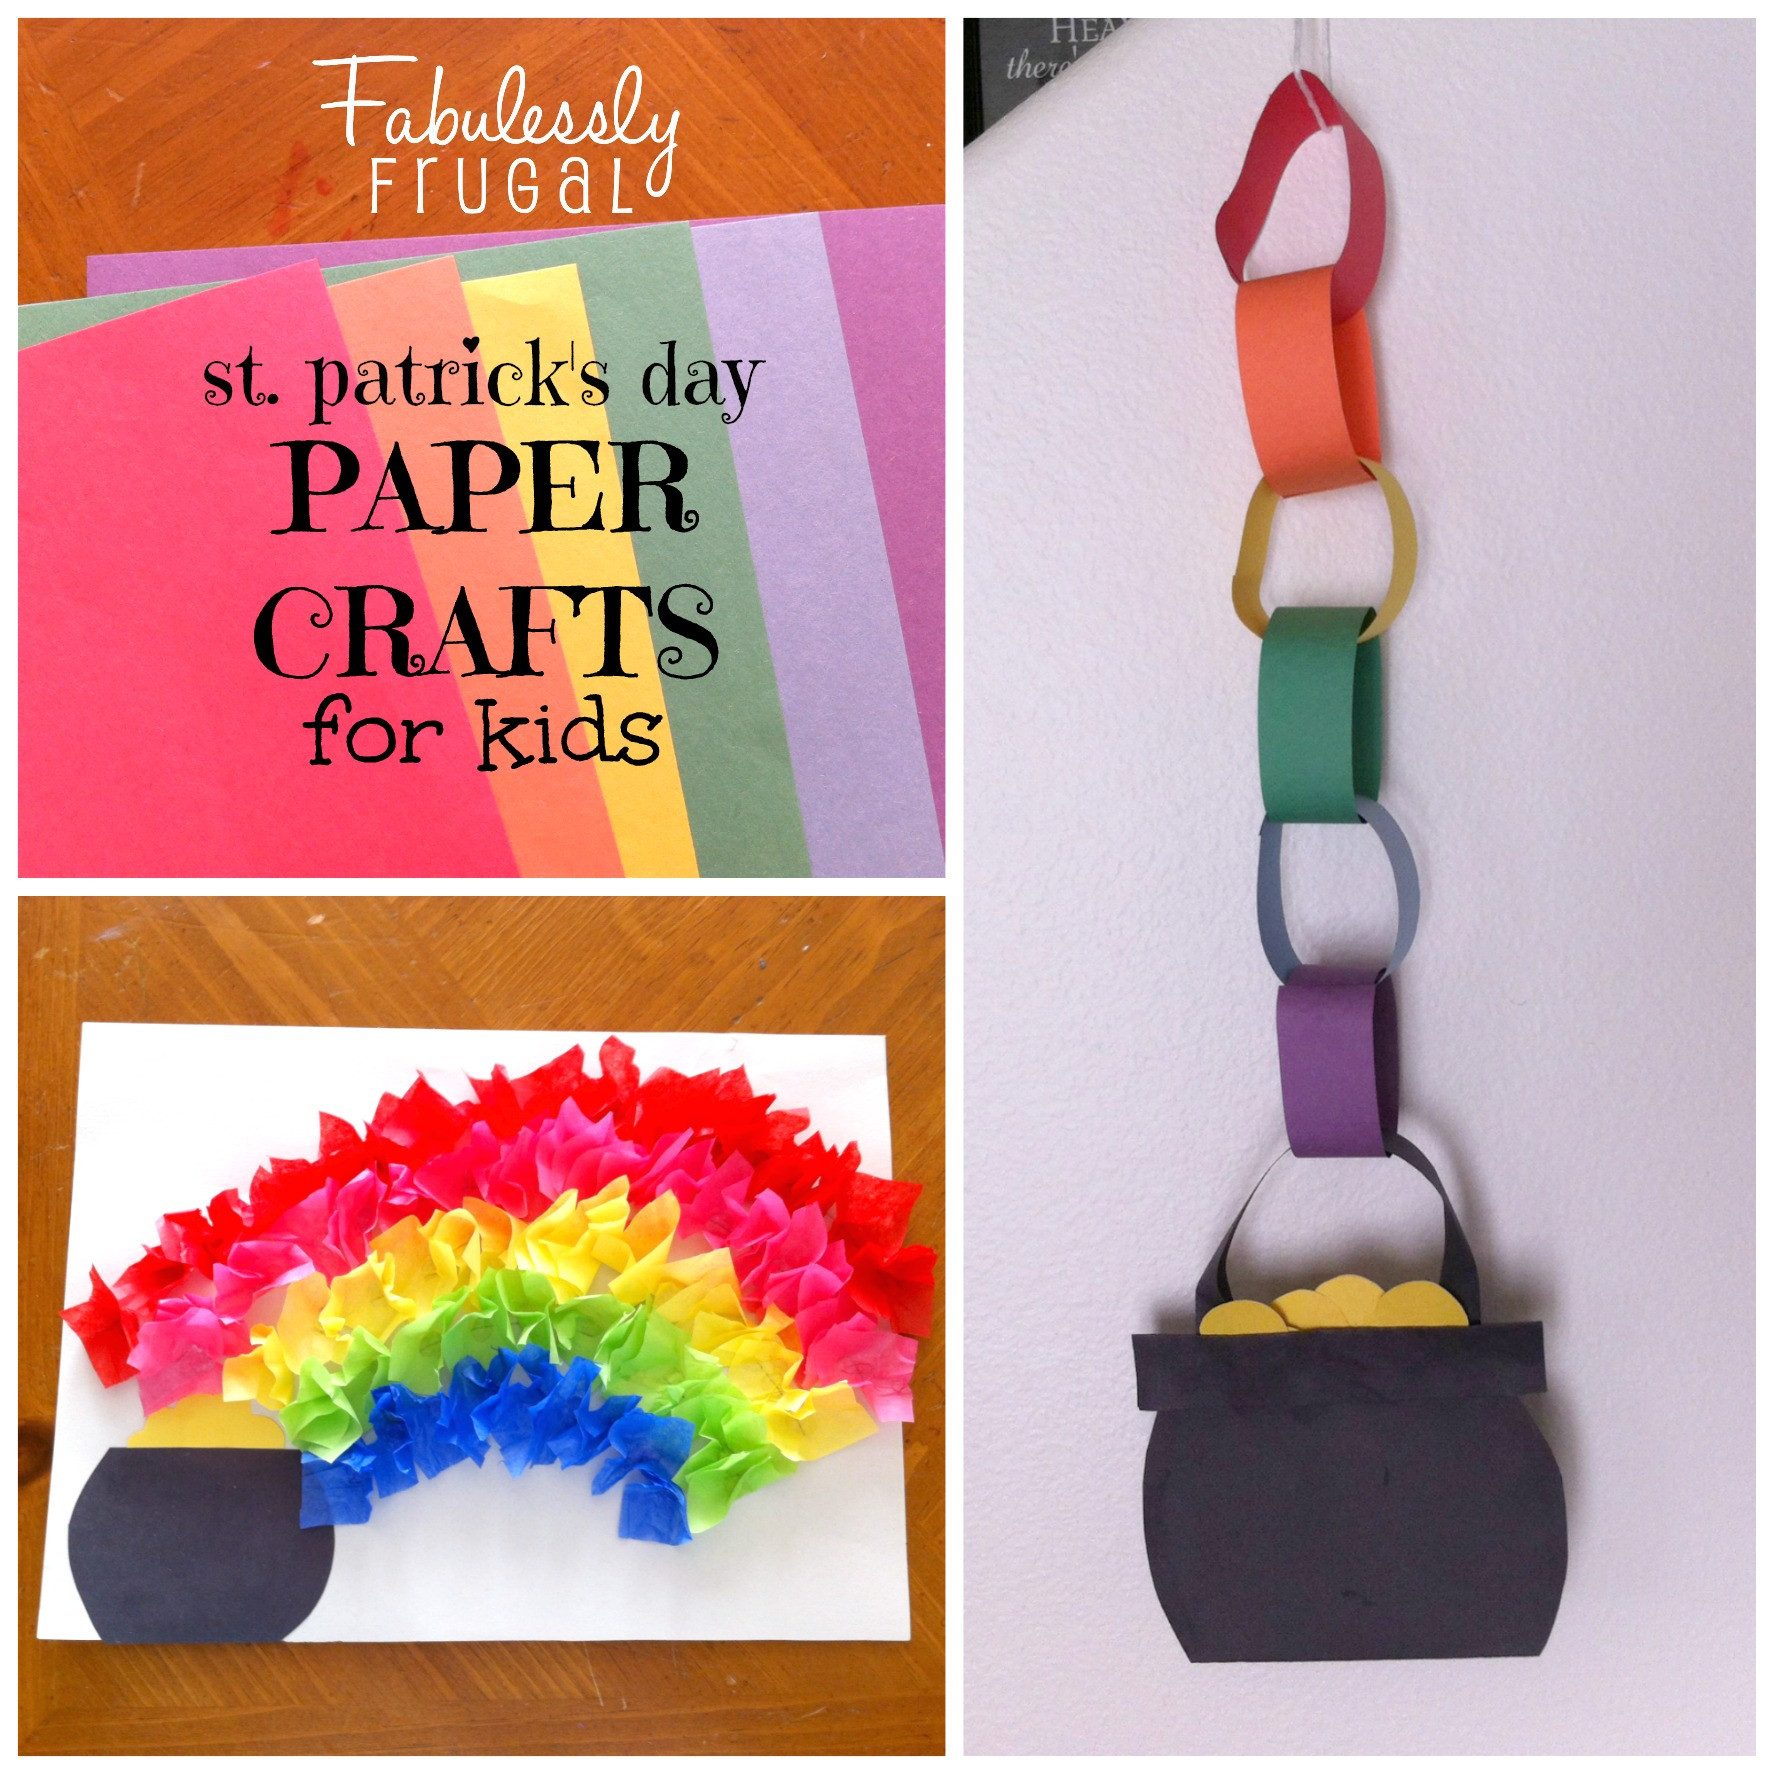 St Patrick's Day Crafts For Toddlers
 St Patrick s Day Paper Crafts for Kids